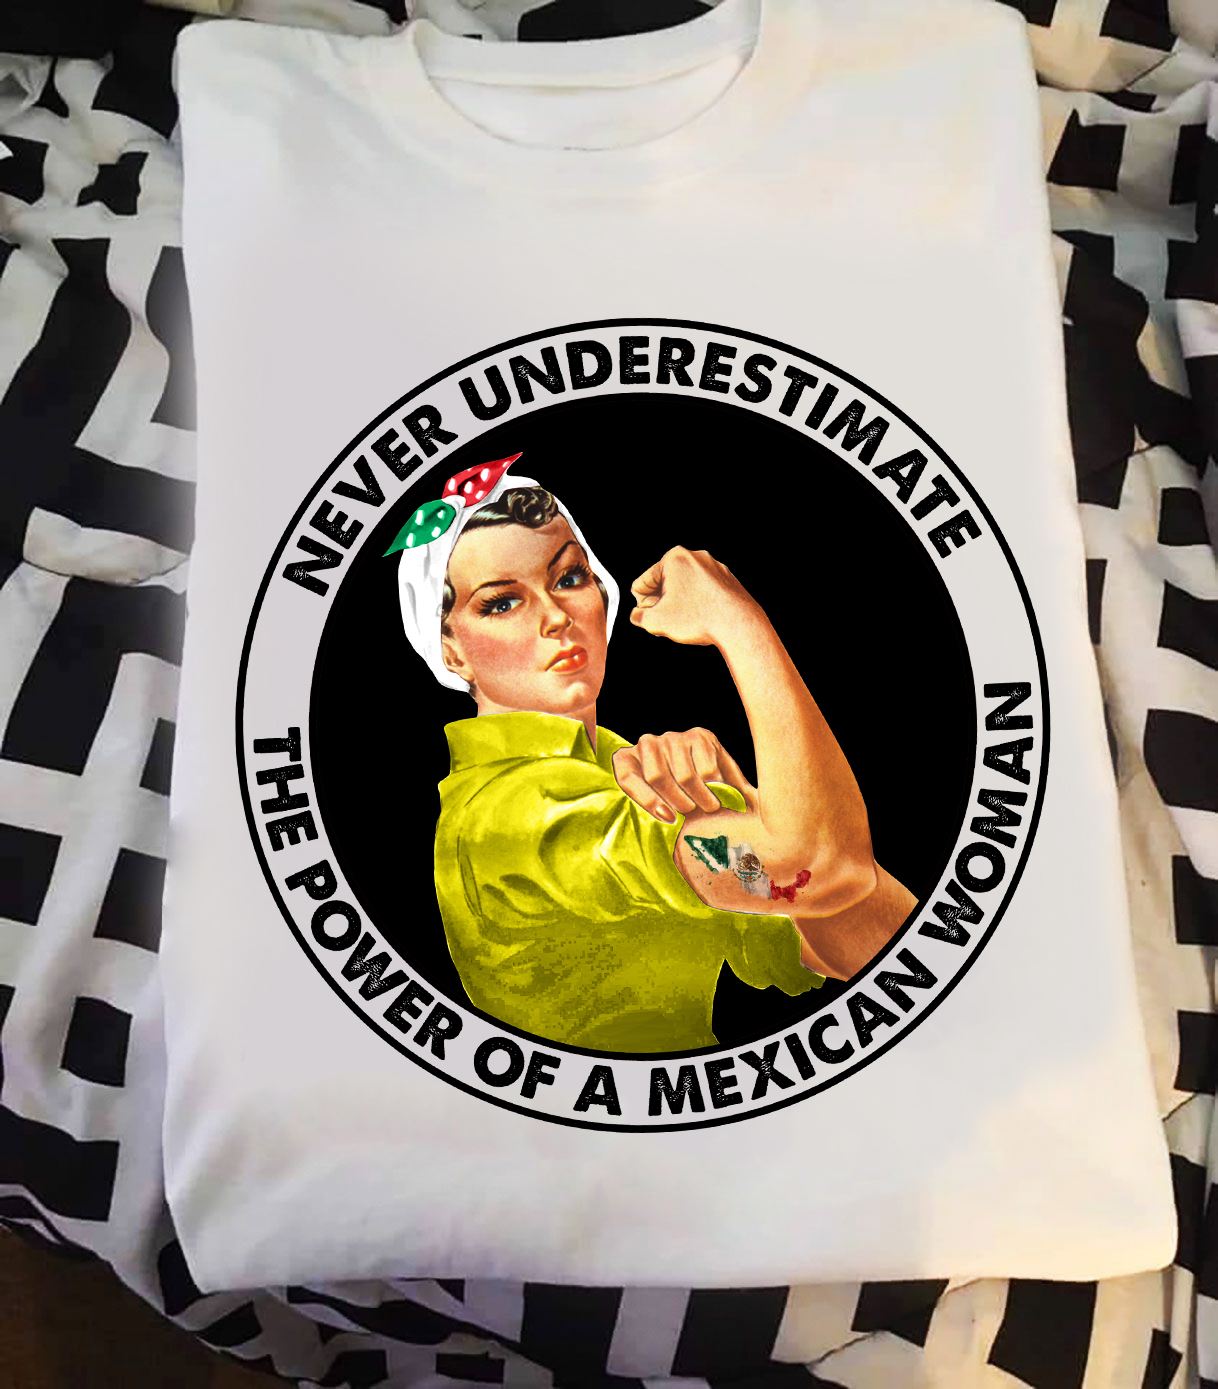 Never underestimate the power of a Mexican woman